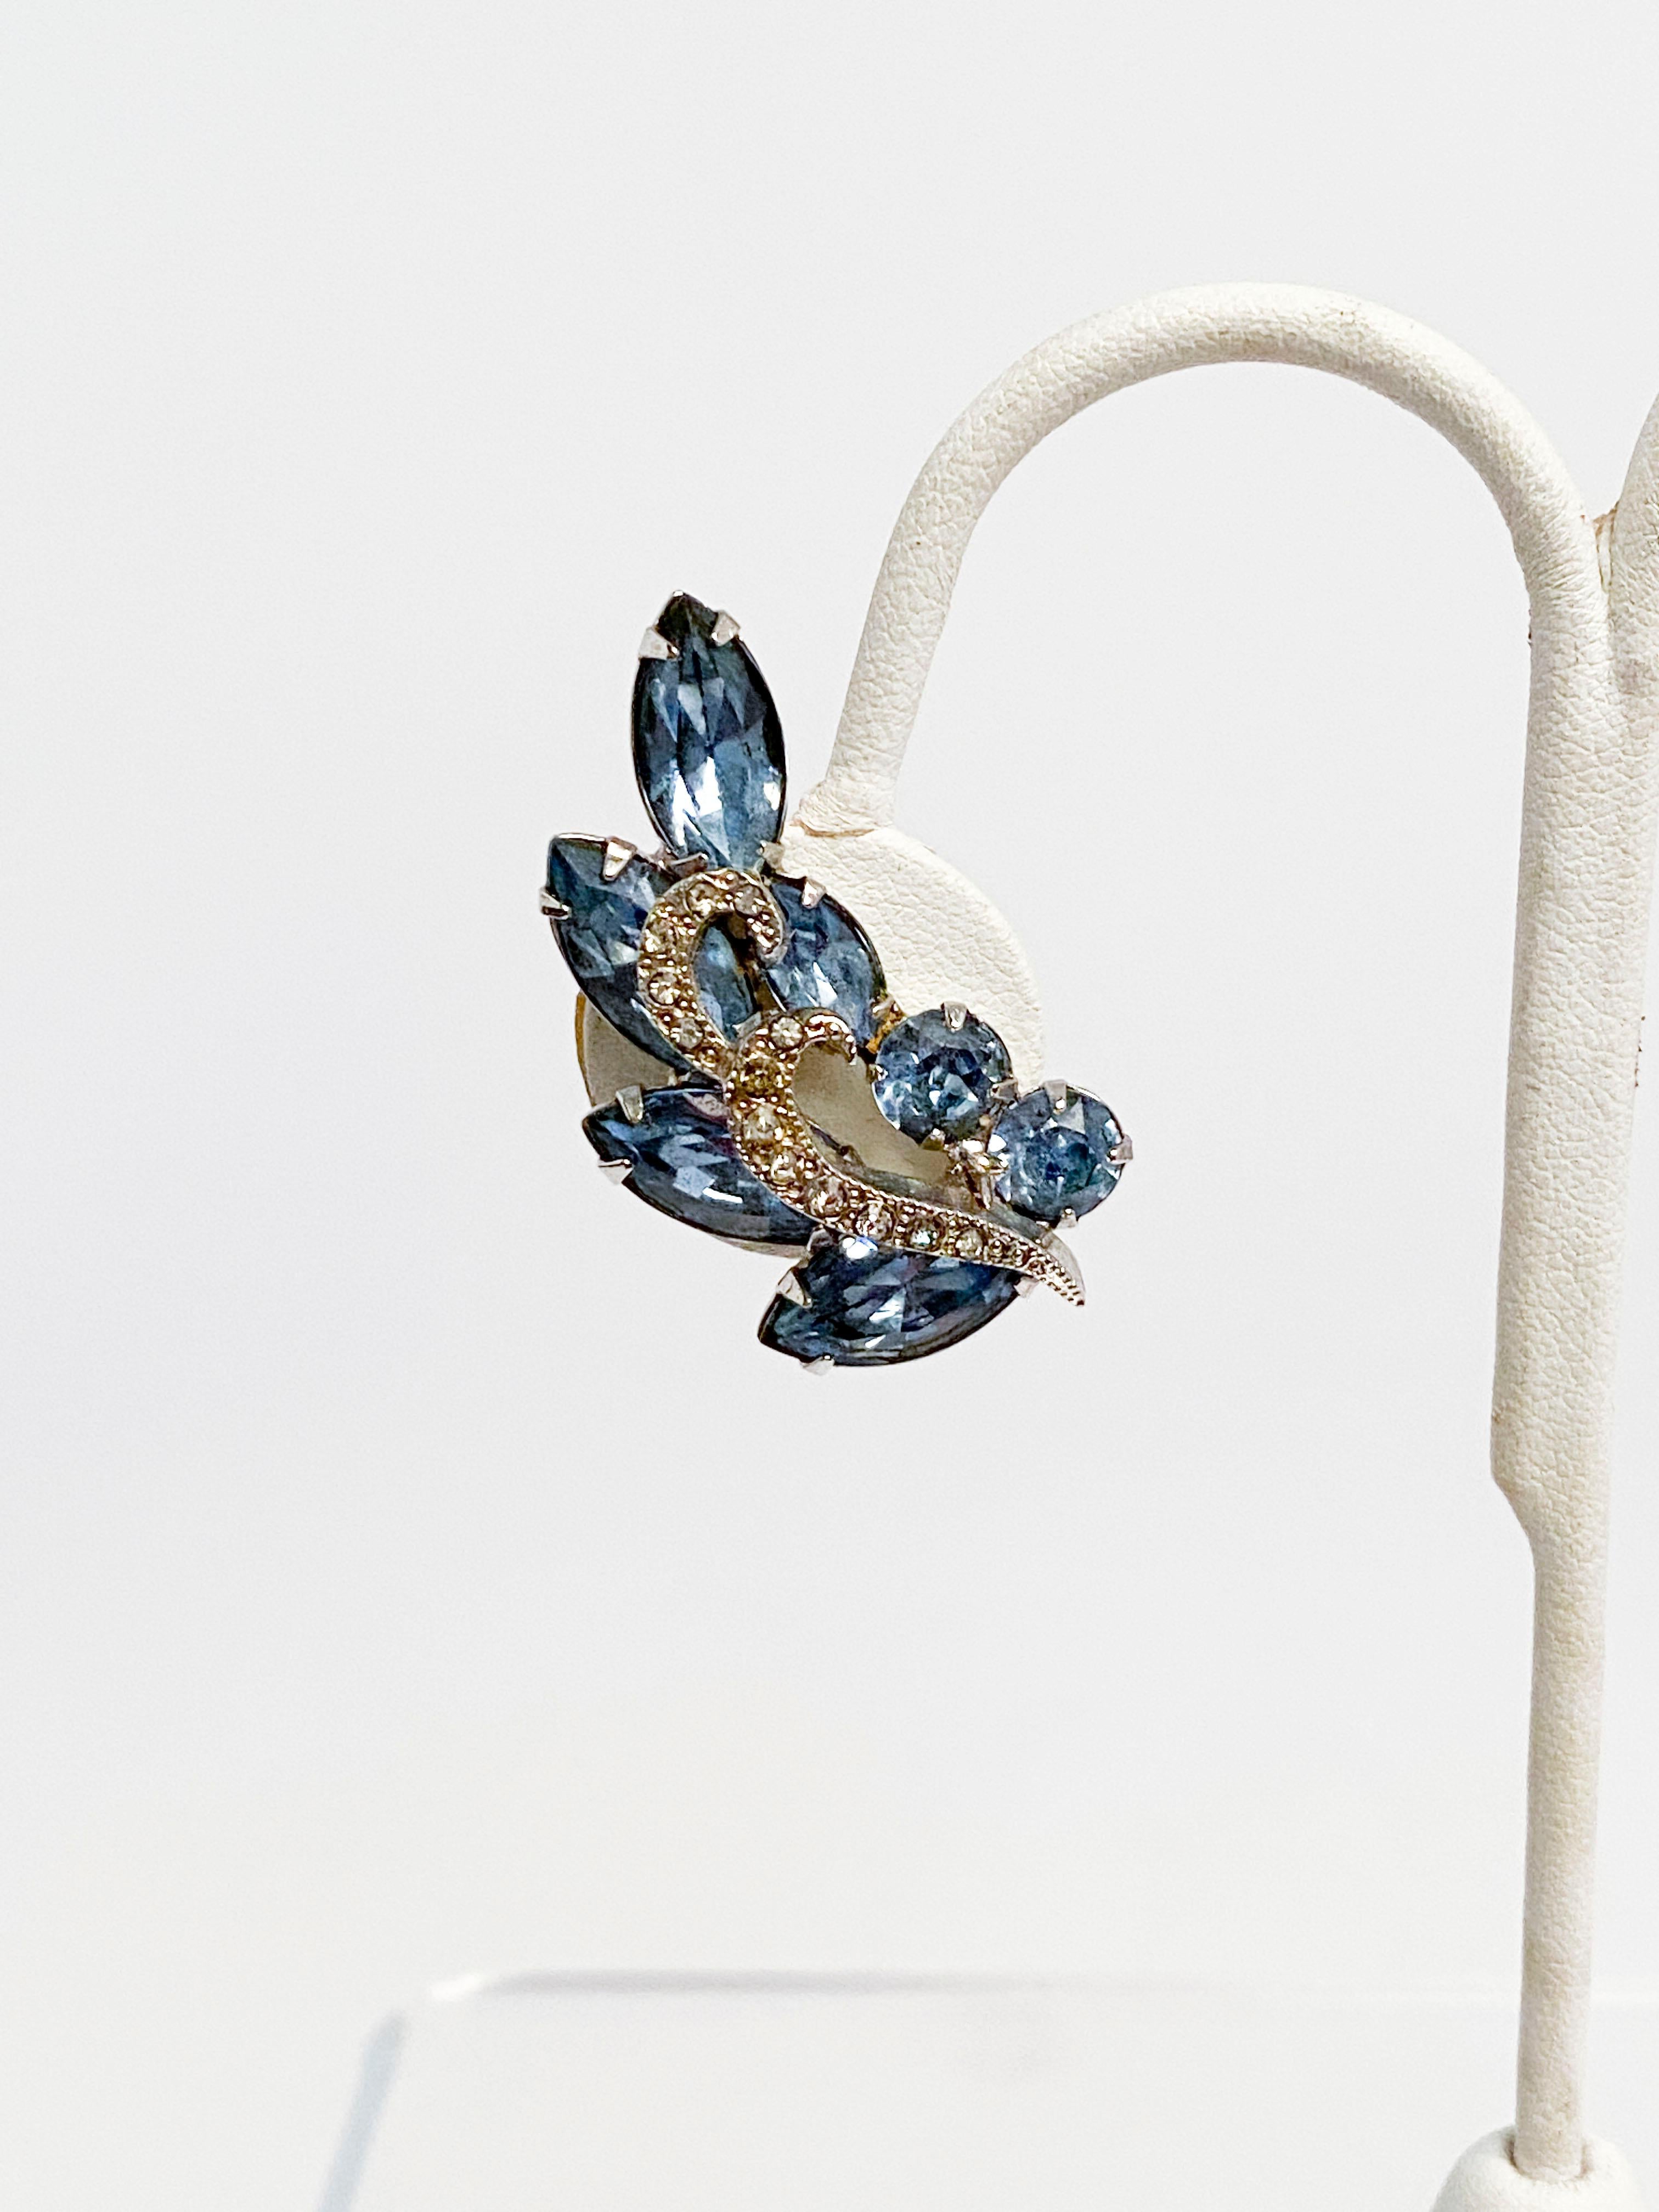 1950s Weiss clip-on earrings adorned with clear and light blue rhinestones. Shaped to be fixed along the side of the ear. 